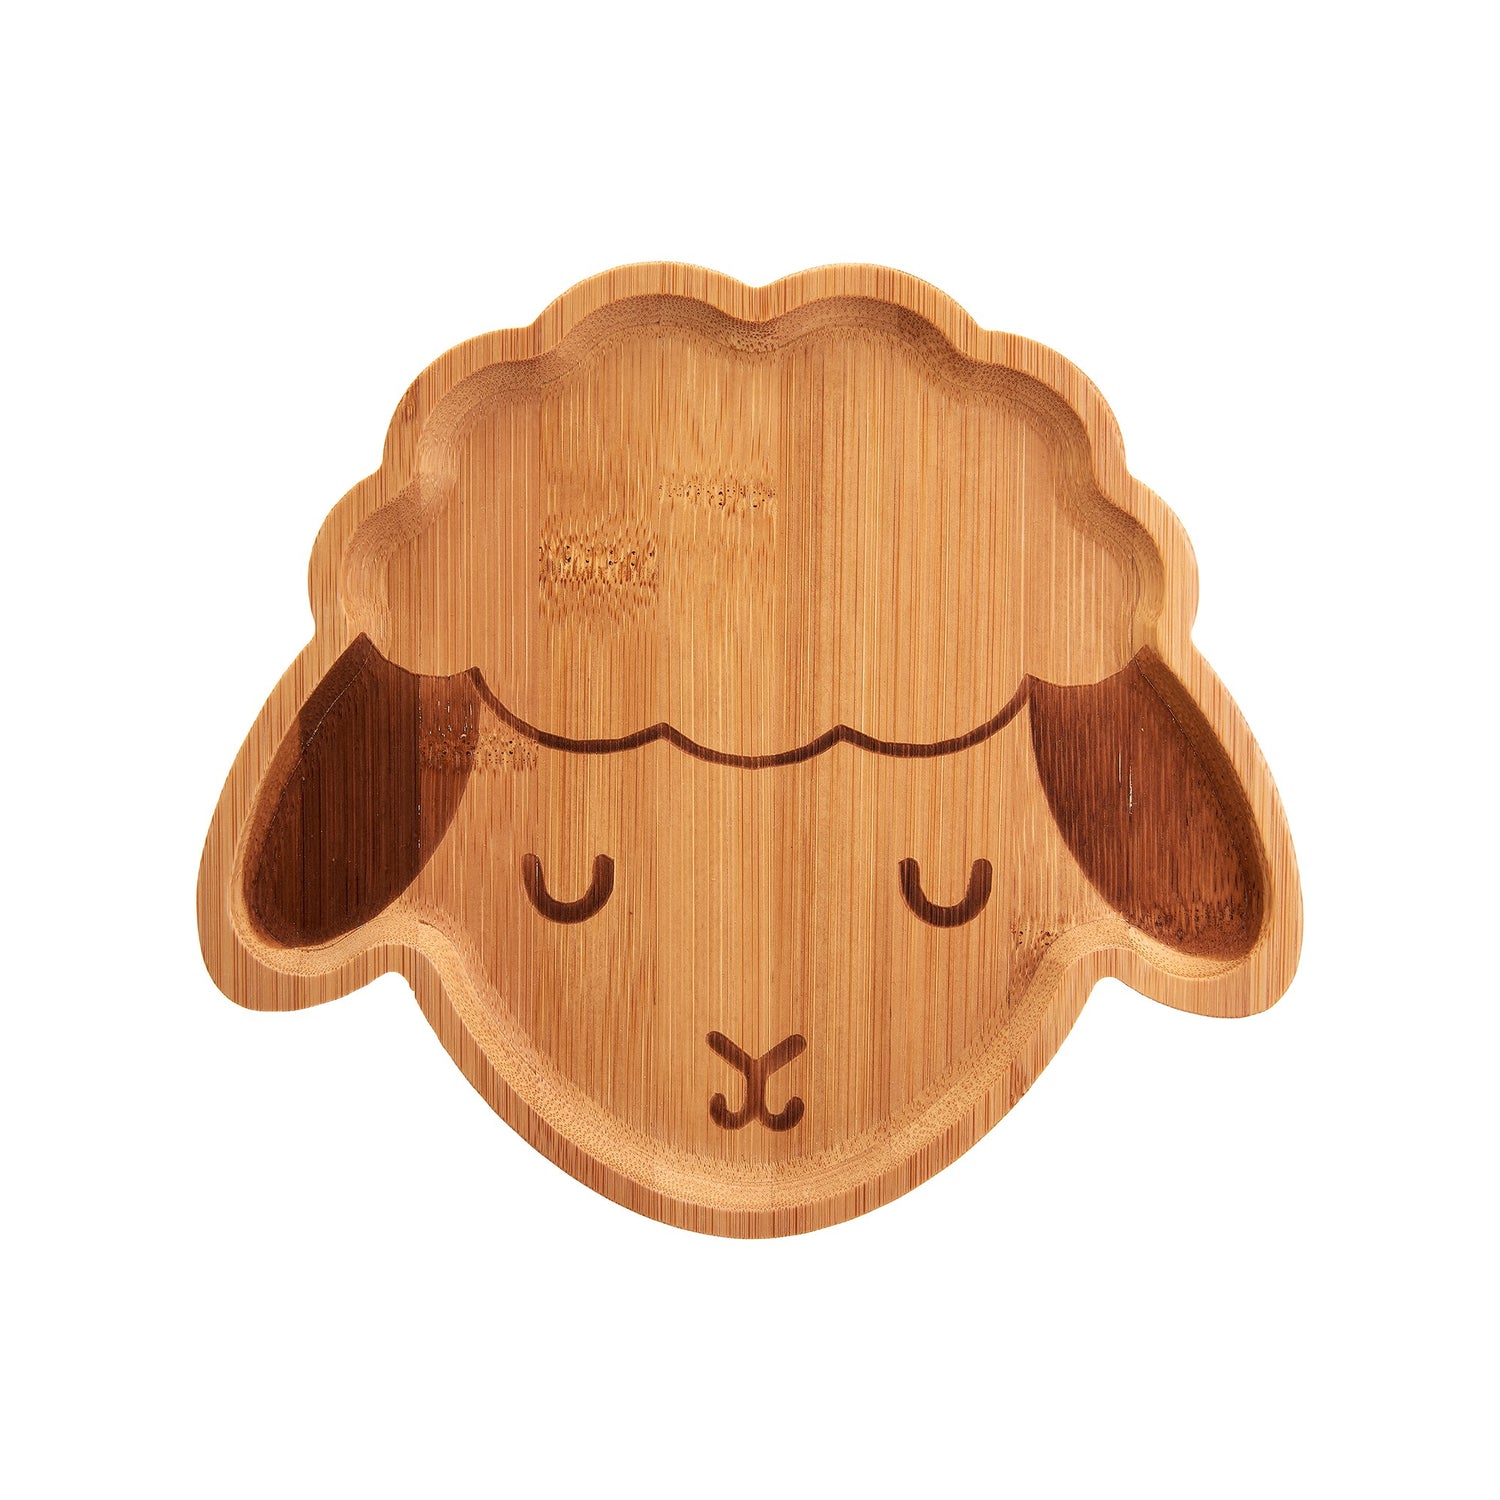 A planet-friendly everyday reusable, this very cute bamboo plate features a sleeping lamb design.